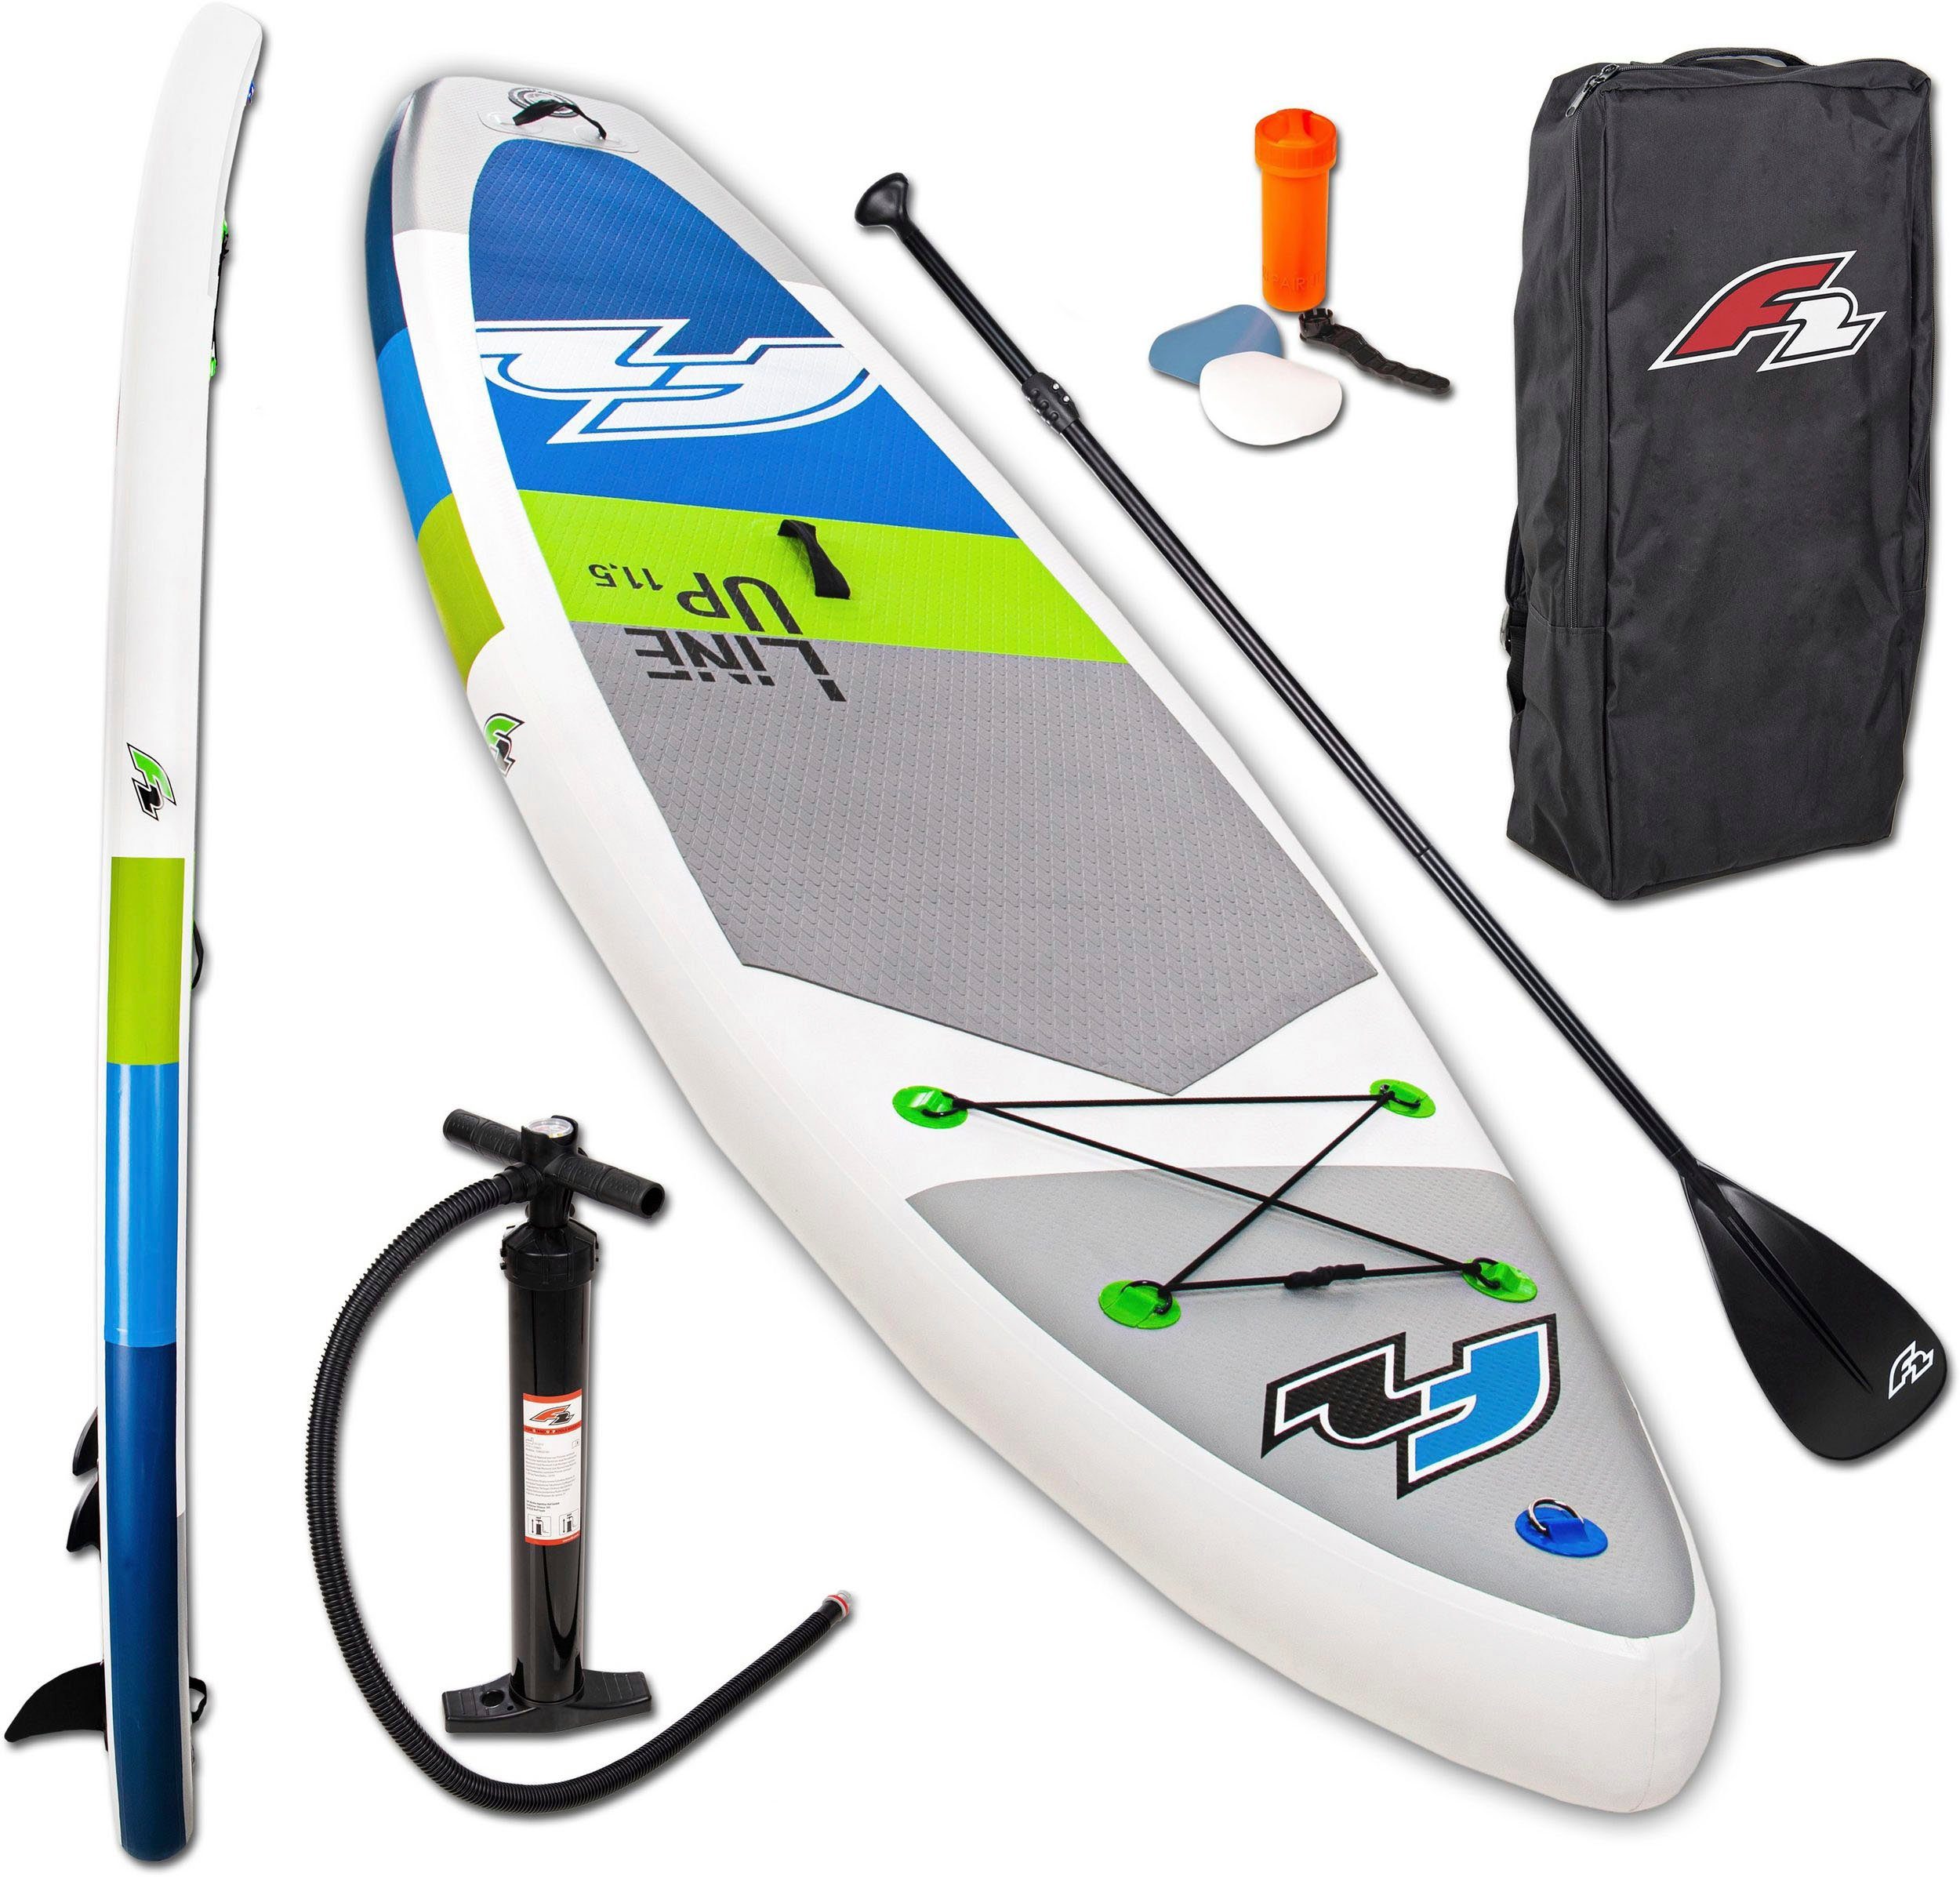 F2 Inflatable 5 (Set, blue Paddling Line Alupaddel, Up Stand SMO F2 mit SUP-Board Up tlg)